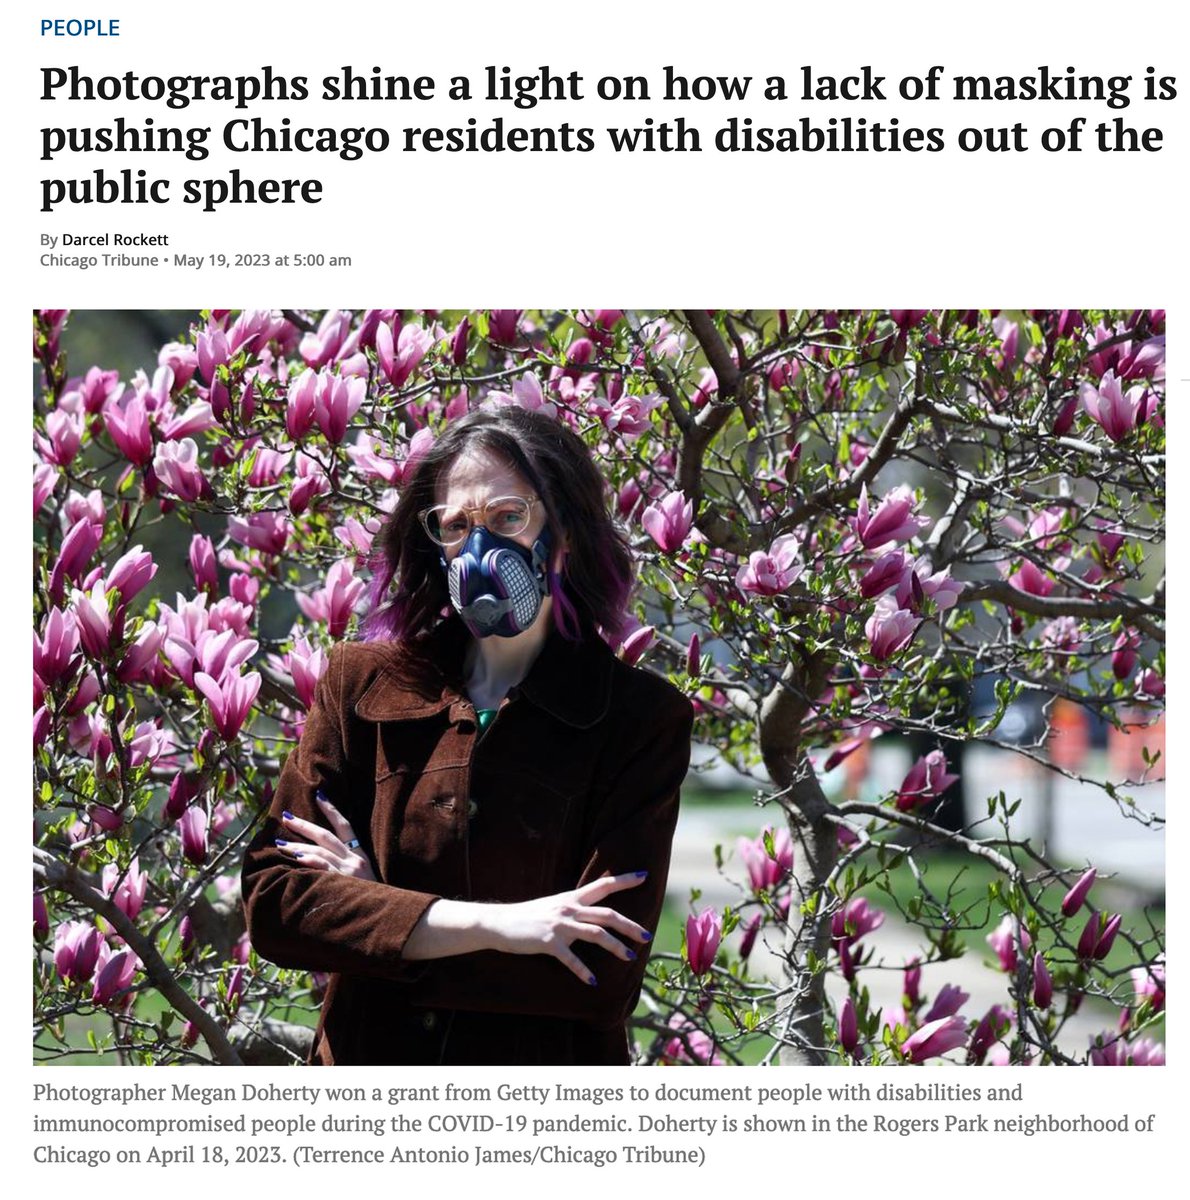 .@chicagotribune did a little story on my remote portrait project of immunocompromised folks from across the US & how we've lost our civil right to access the public sphere b/c everyone is pretending the pandemic is over & refusing to mask.

#COVIDIsNotOver #KeepMasksInHealthcare